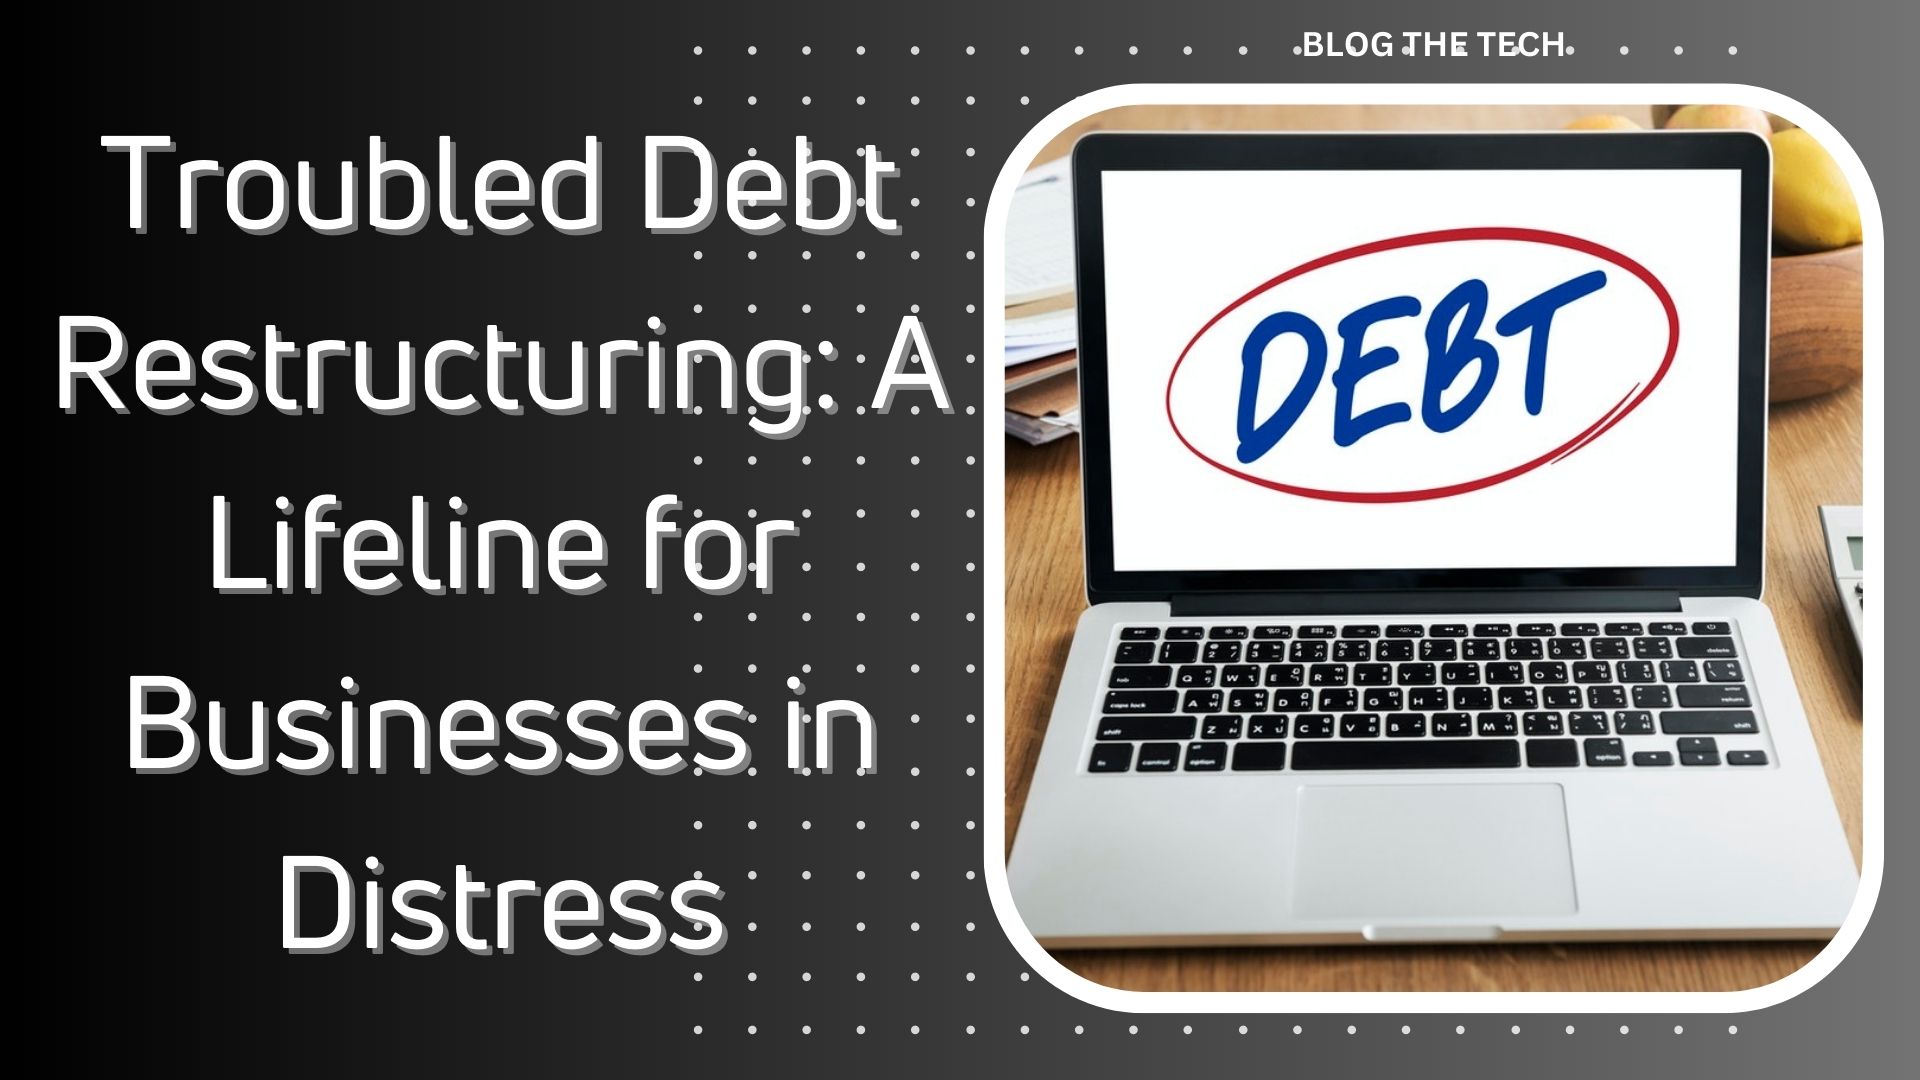 Troubled Debt Restructuring: A Lifeline for Businesses in Distress